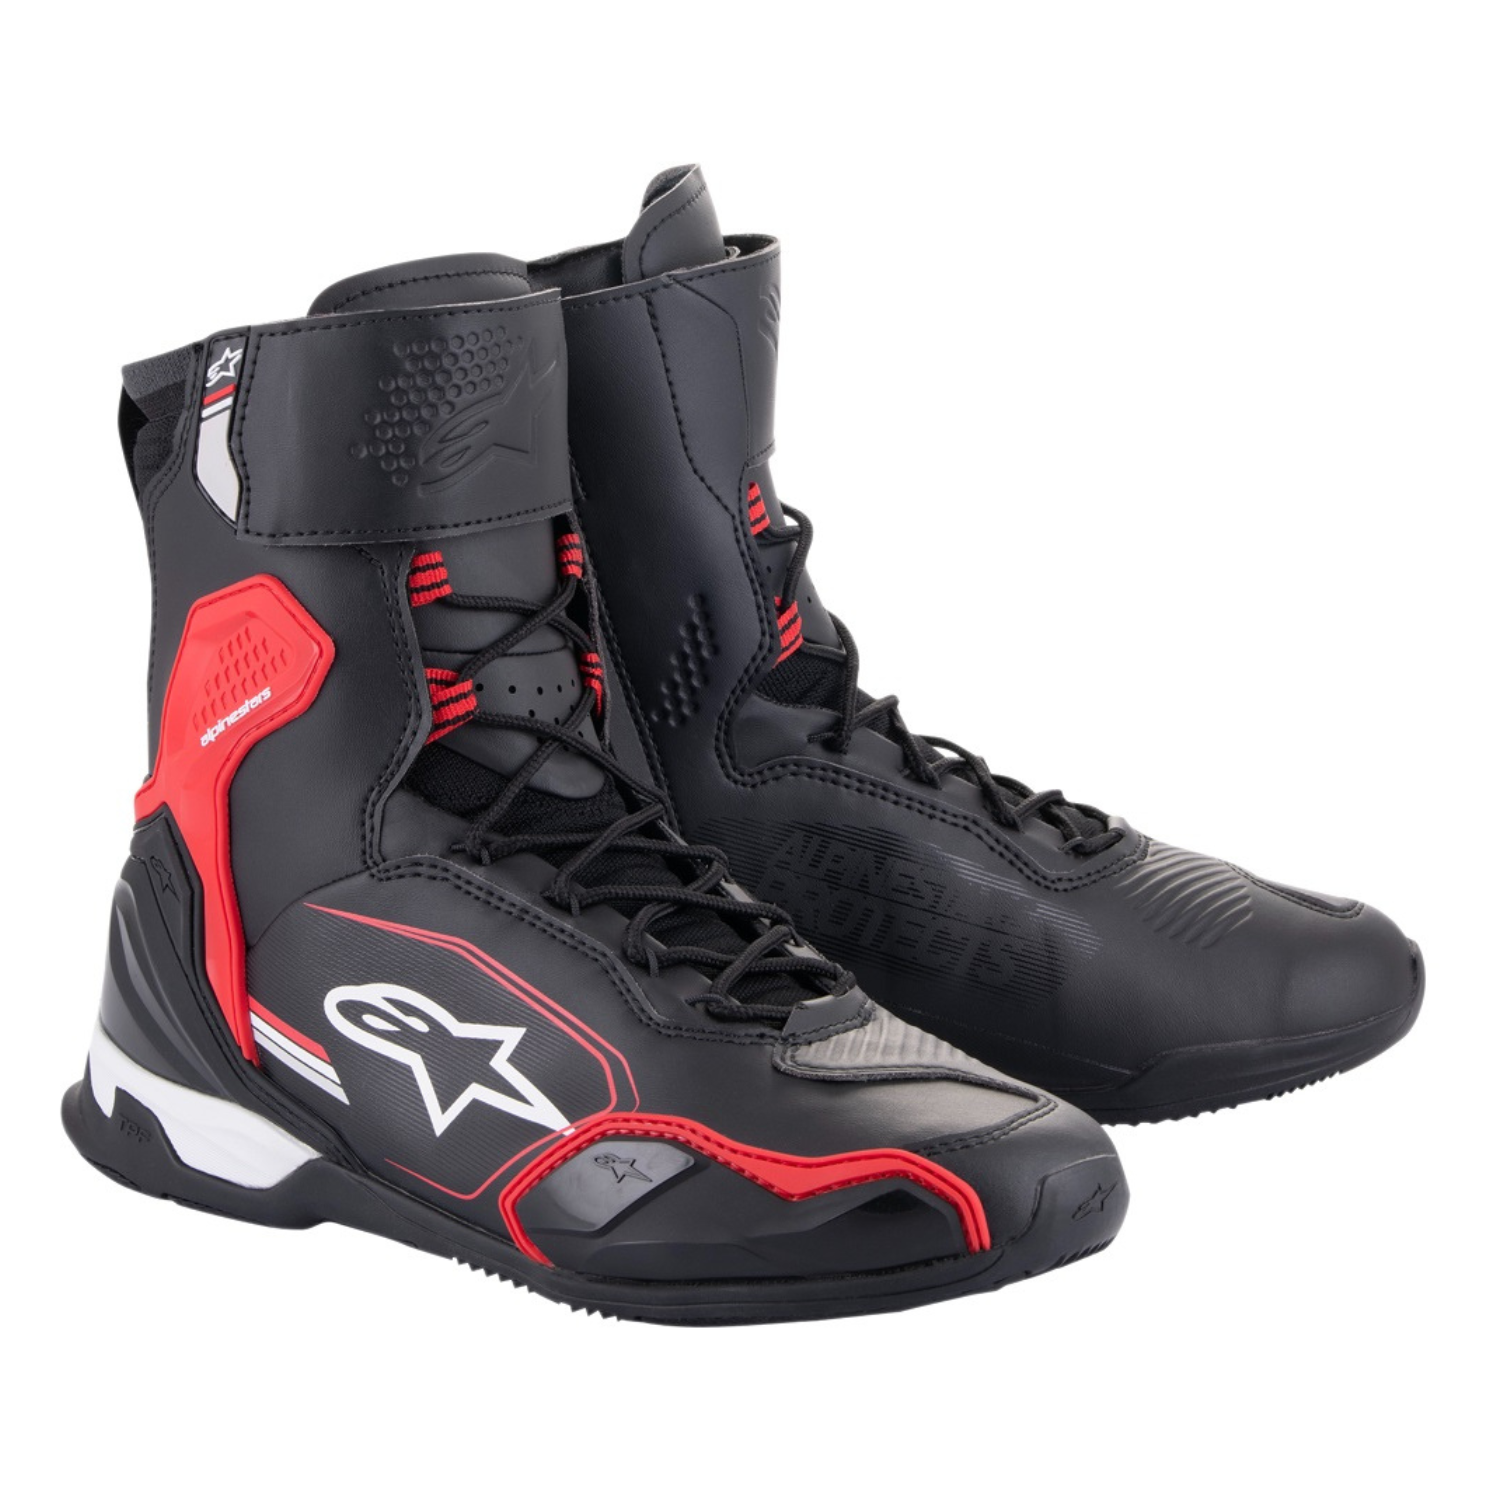 Image of Alpinestars Superfaster Shoes Black Bright Red White Size US 13 EN